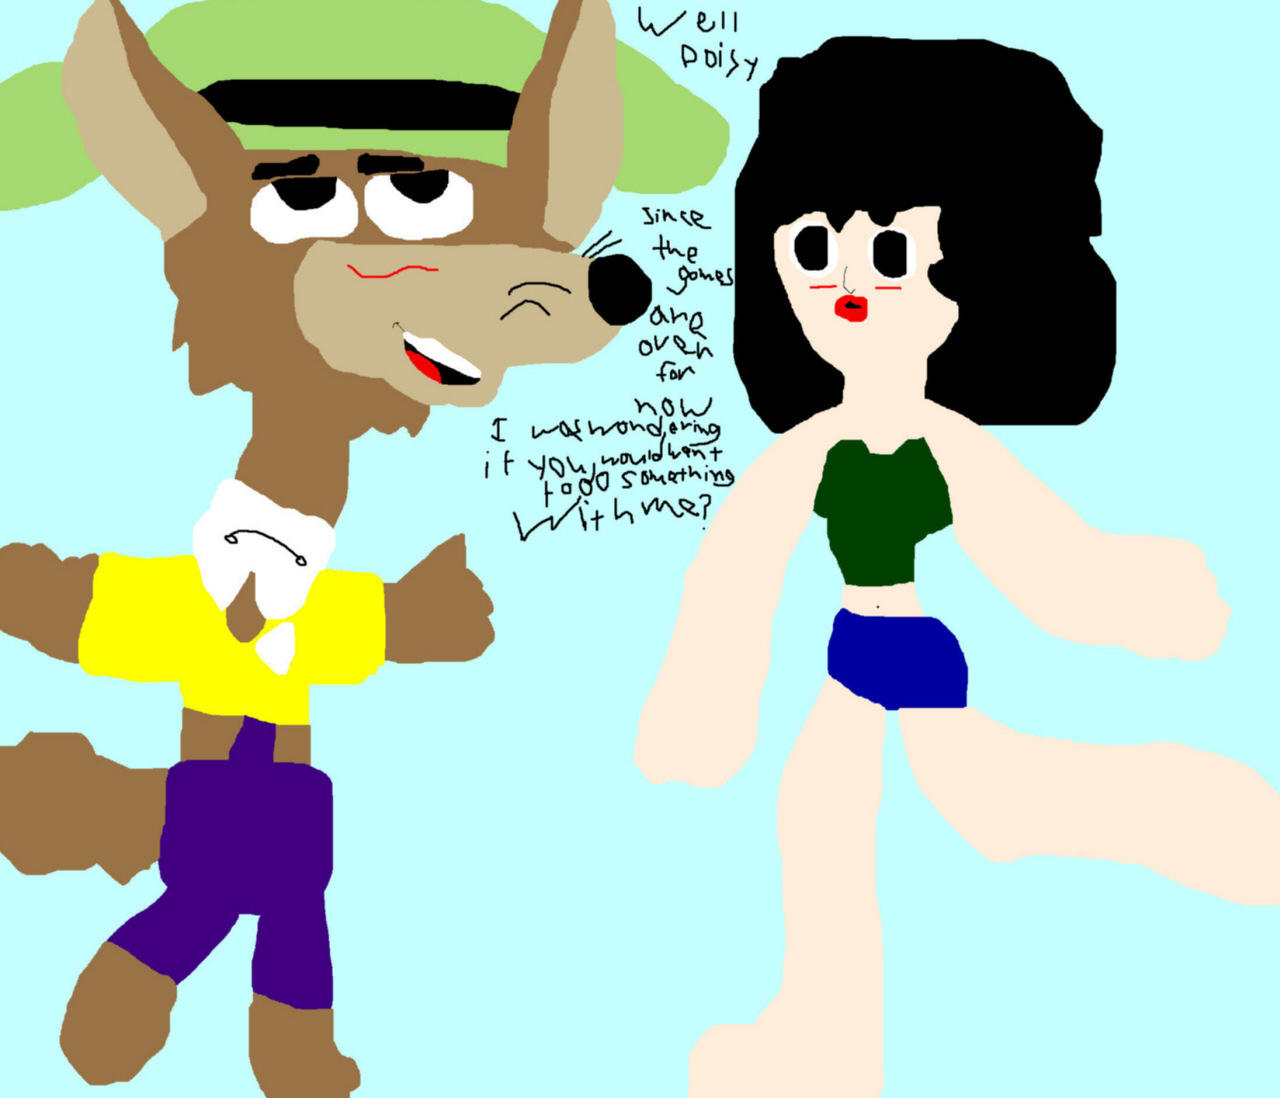 Mildew Wolf Trying To Ask Daisy Mayhem Out On A Date Ms Paint by Falconlobo